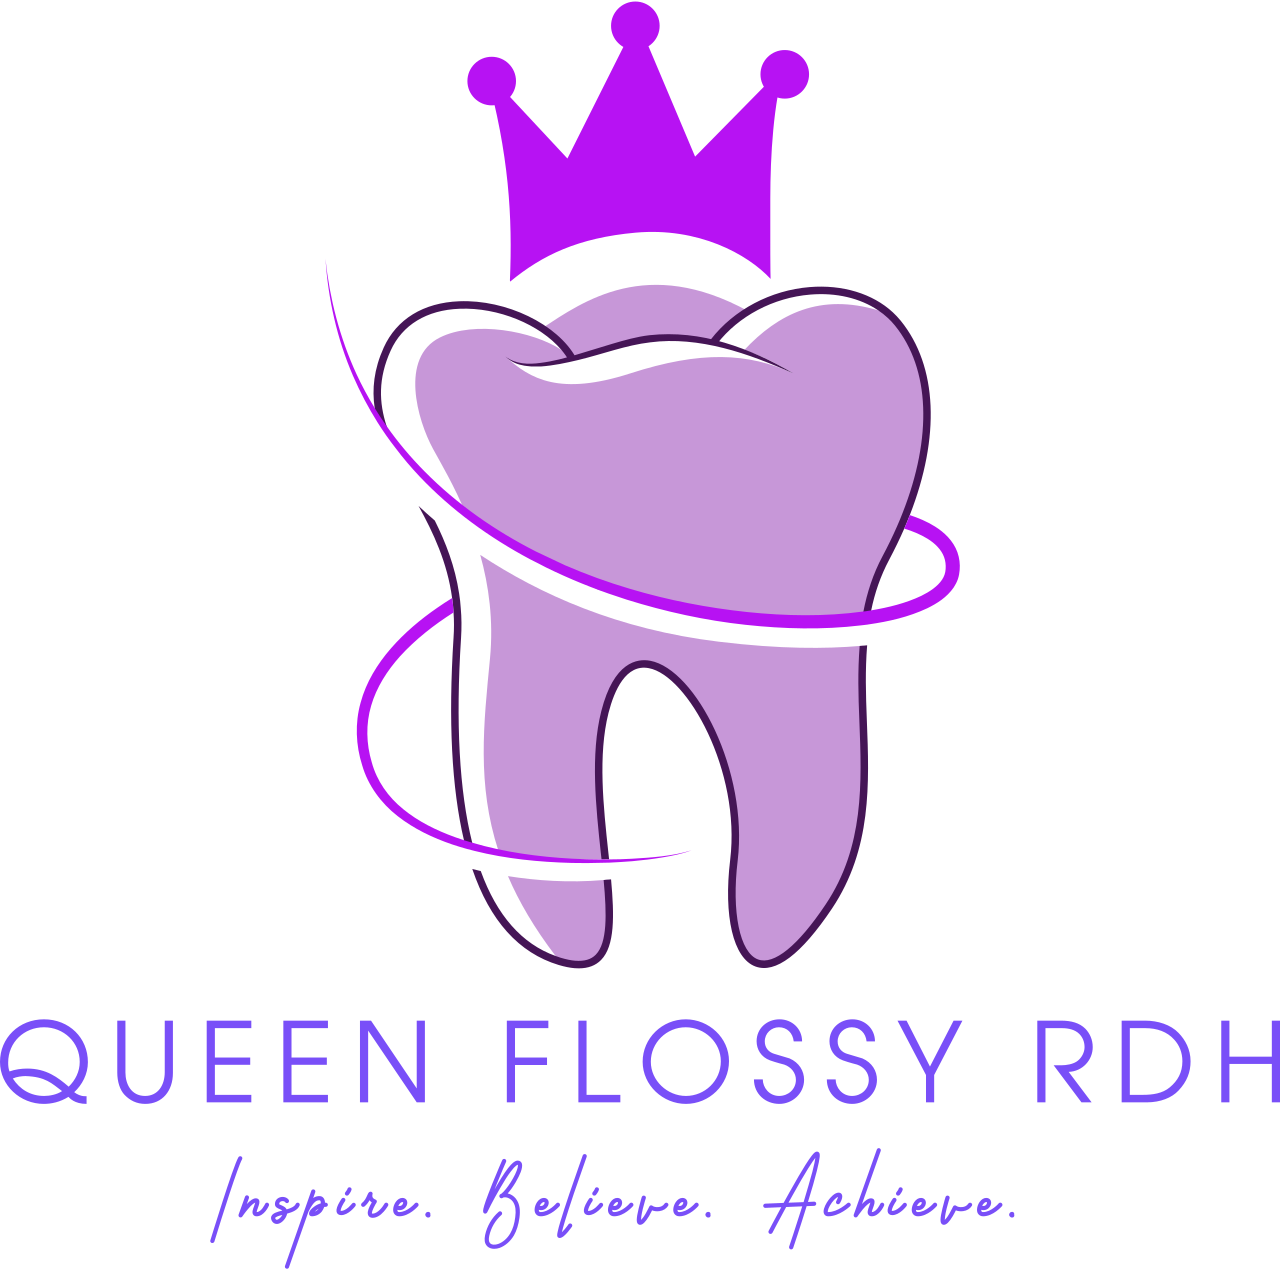 queen flossy rdh's web page